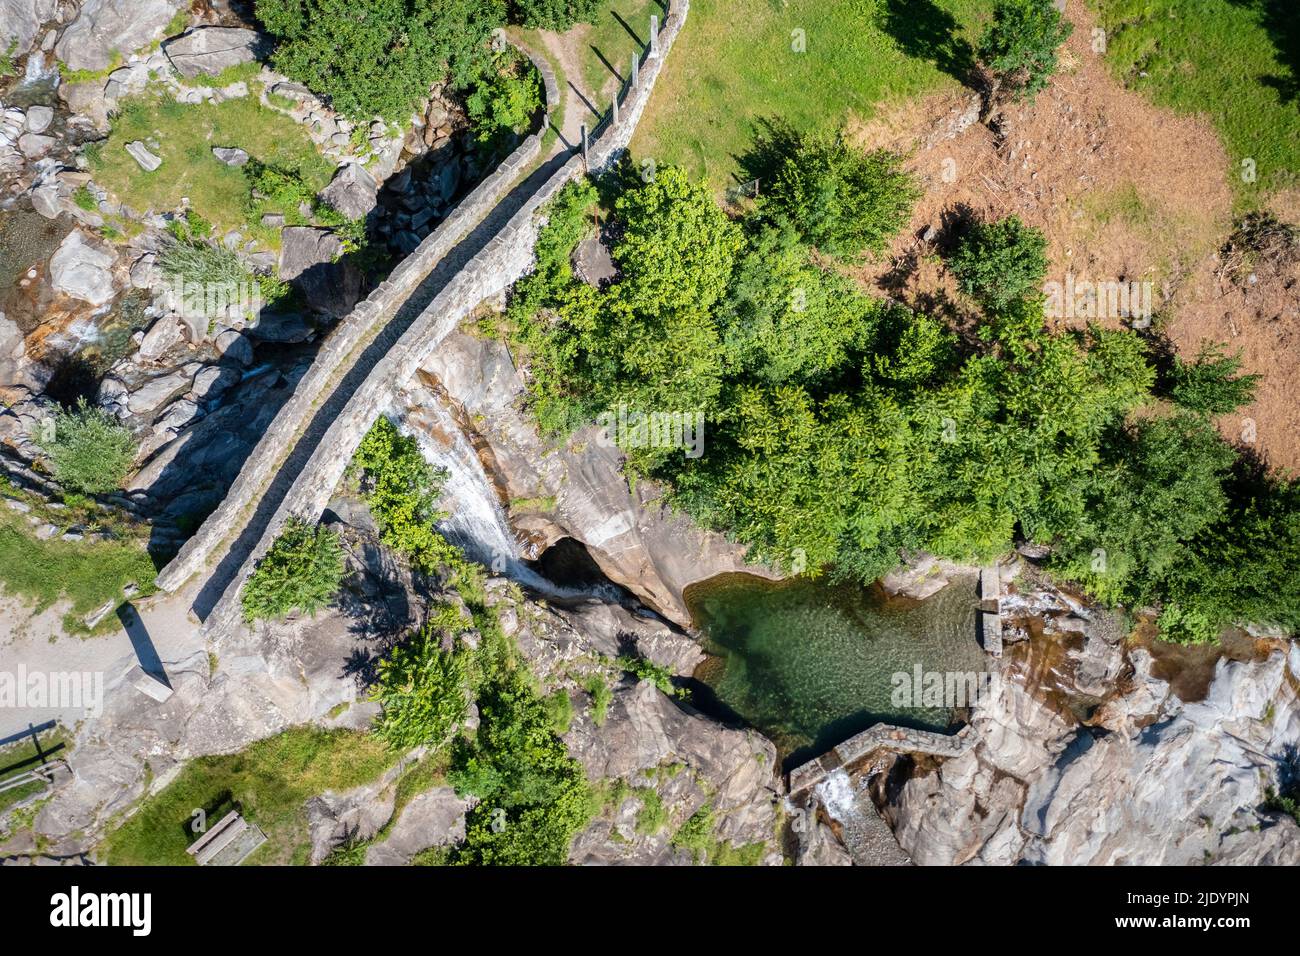 Aerial view of the church and waterfall of Santa Petronilla located in Biasca town. Biasca, district of Riviera, Canton of Ticino,Switzerland. Stock Photo